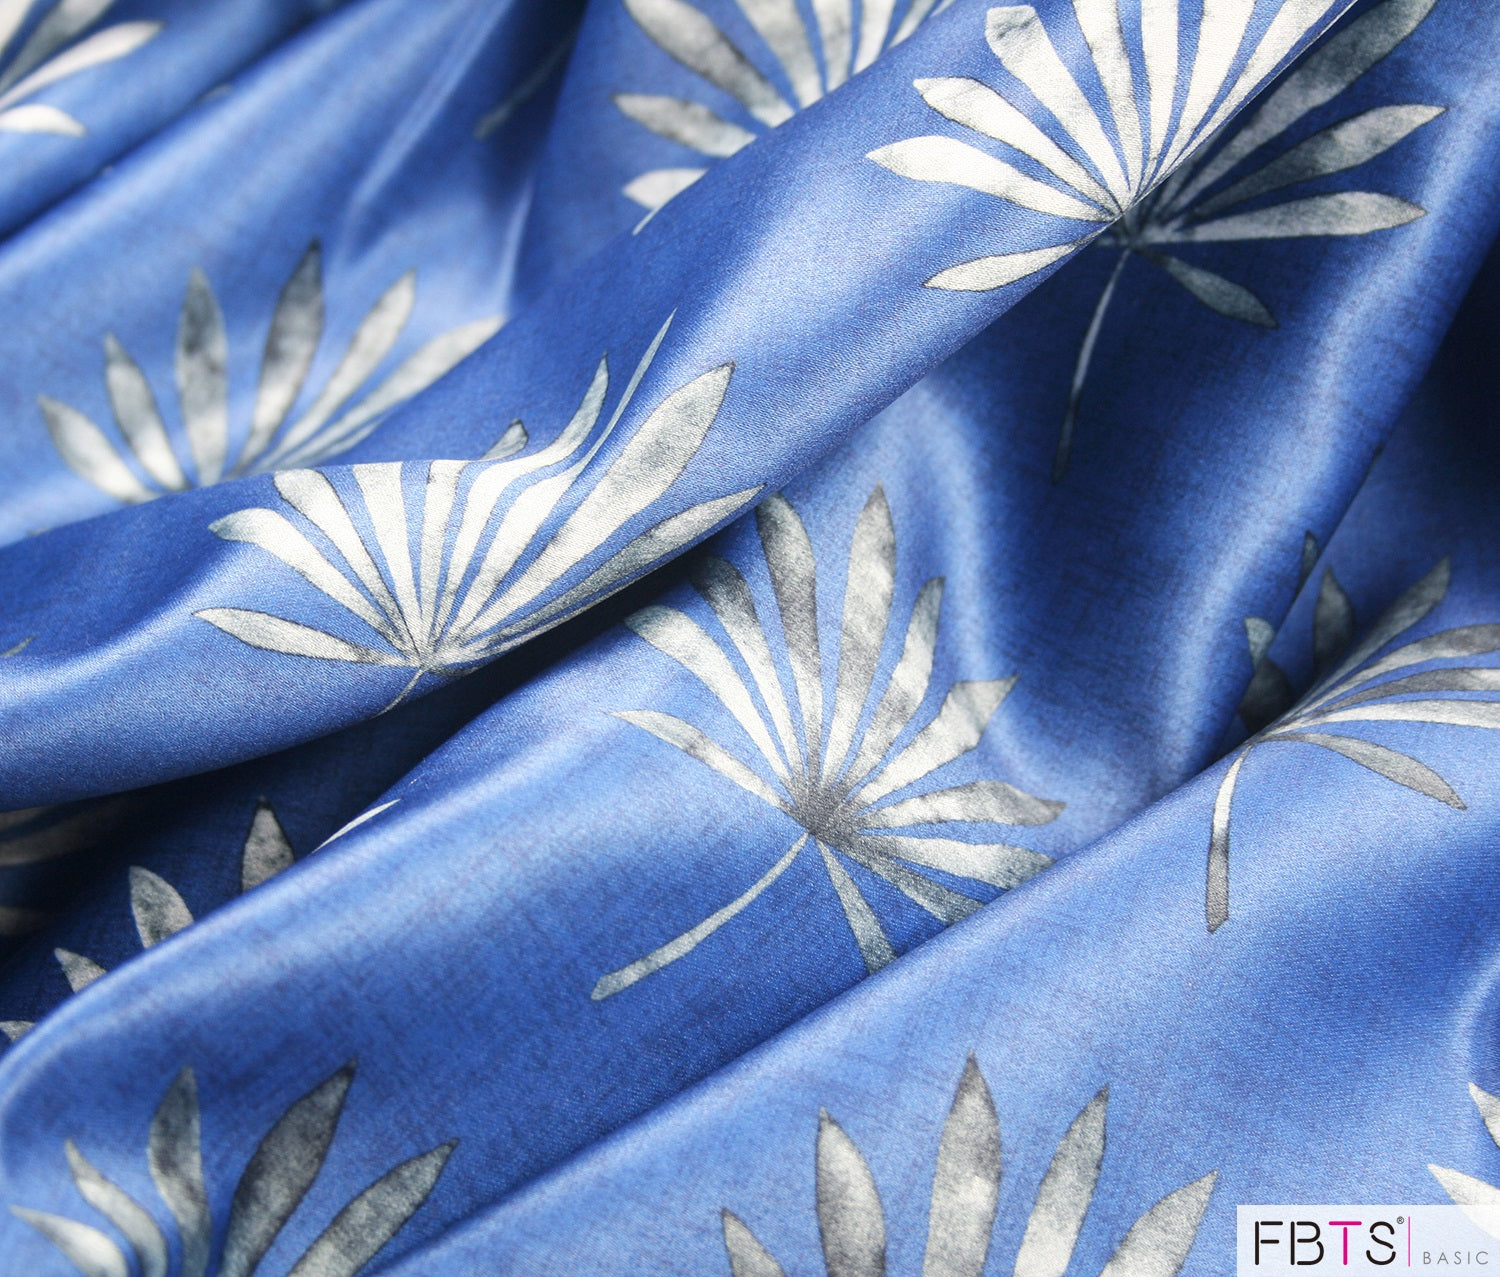 Window Curtain 1 Panel 50% Blackout Blue Color Leaves Pattern Custom Made Window Drapes